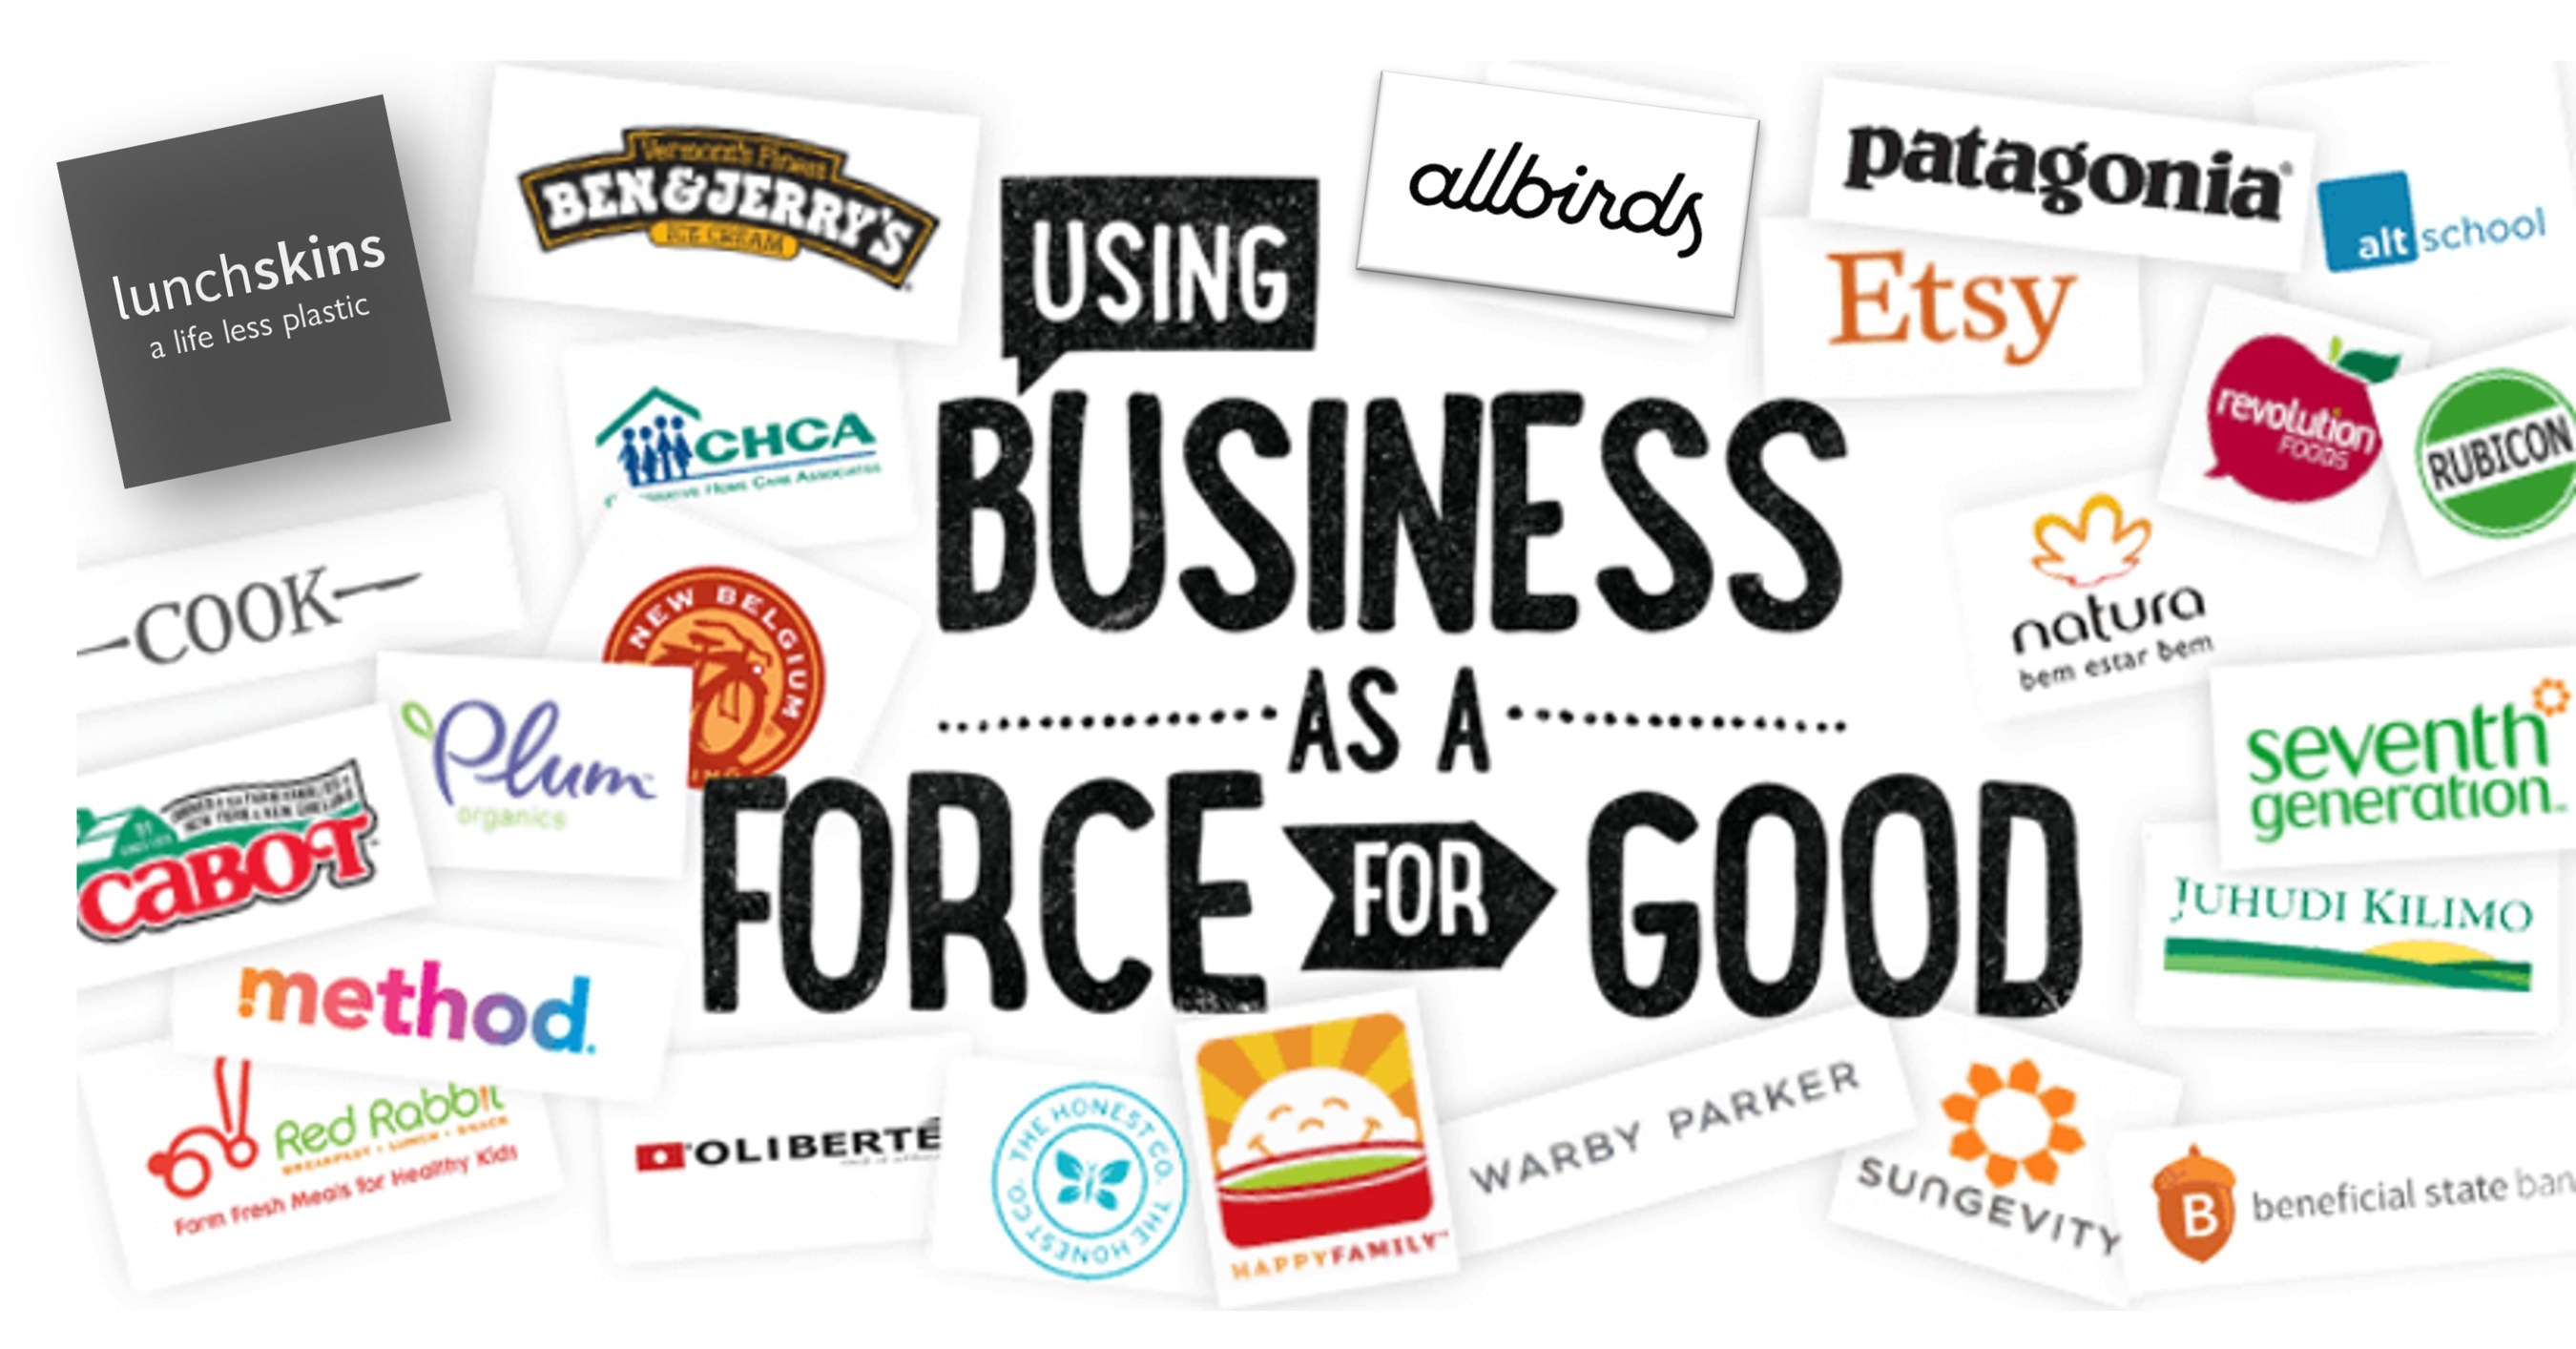 Lunchskins Proudly Announces B Corp Certification